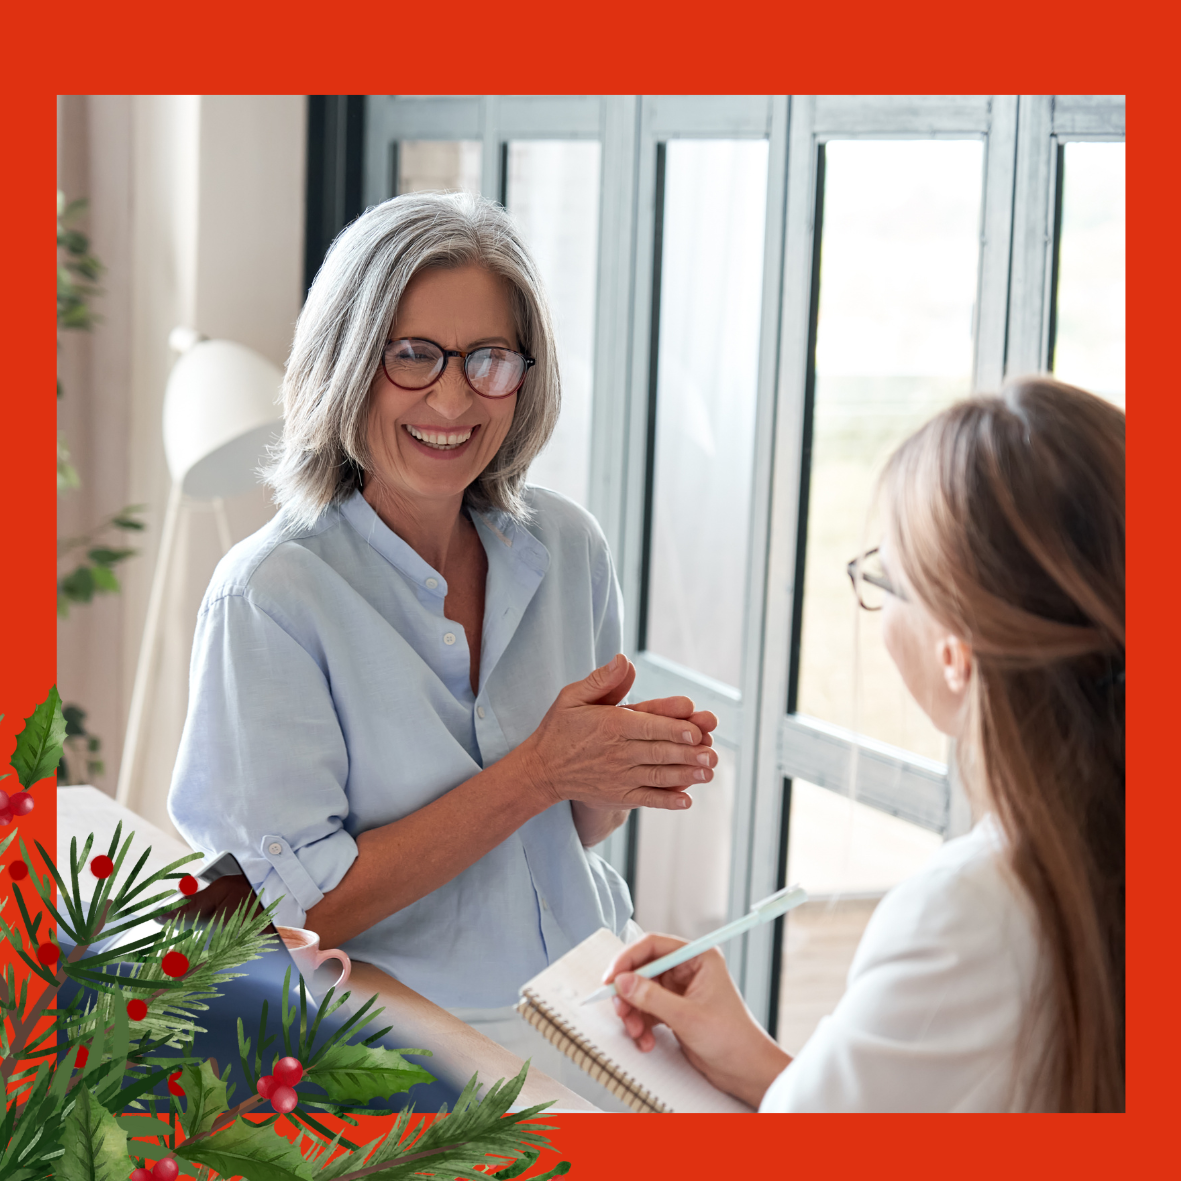 An image of a lady with red rimmed glasses, who is laughing with the woman opposite her. She has her hands together as if she is explaining something. The woman opposite is taking notes on a notepad. There are holly and red berries in the left hand corner of the image. 